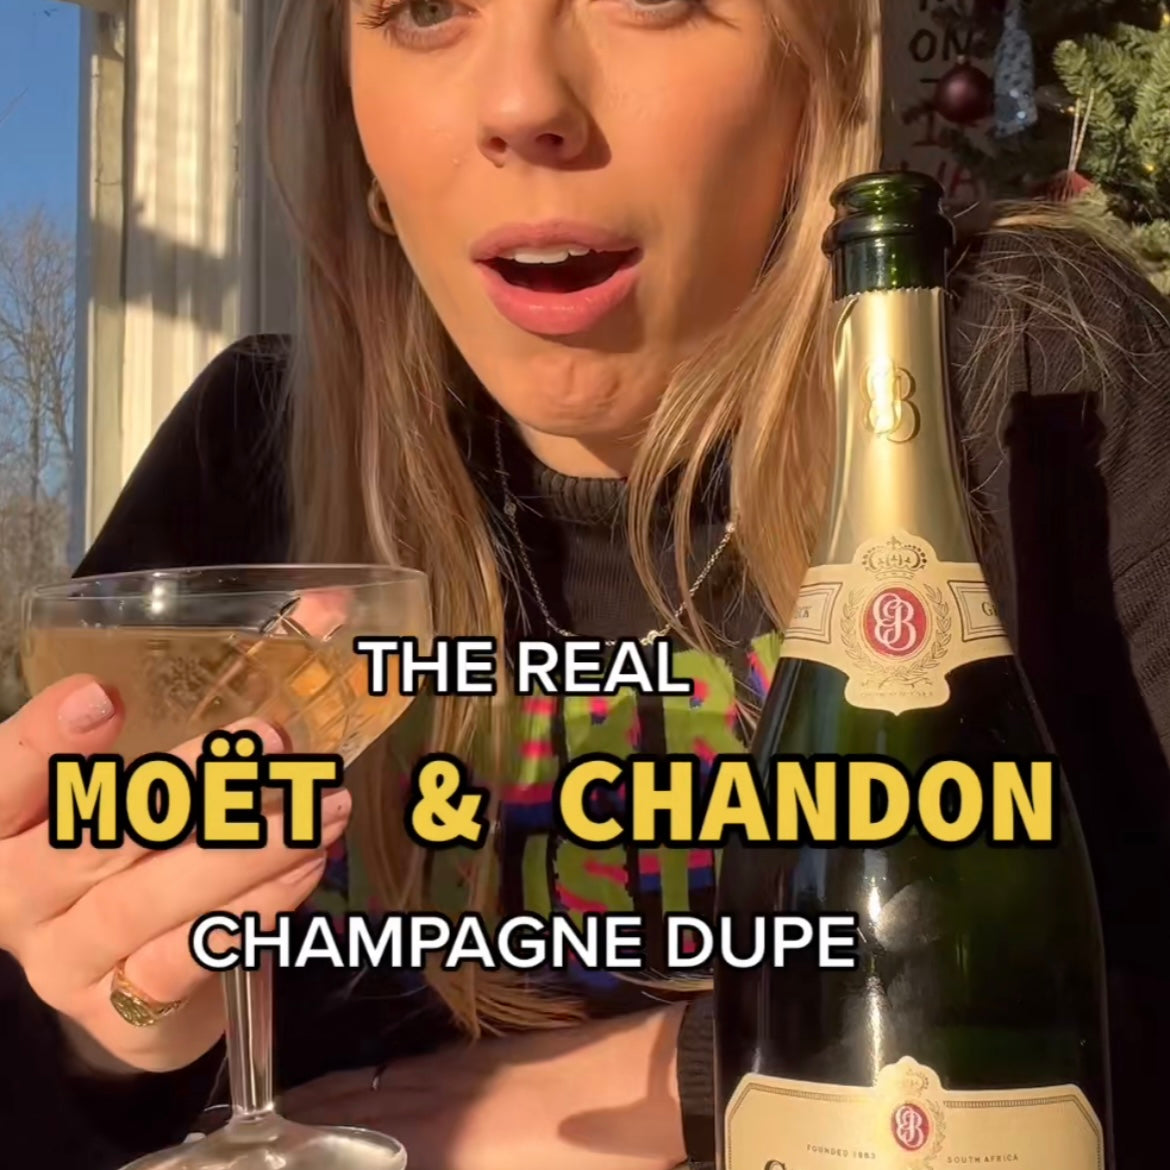 Here's my Moët & Chandon Champagne dupe